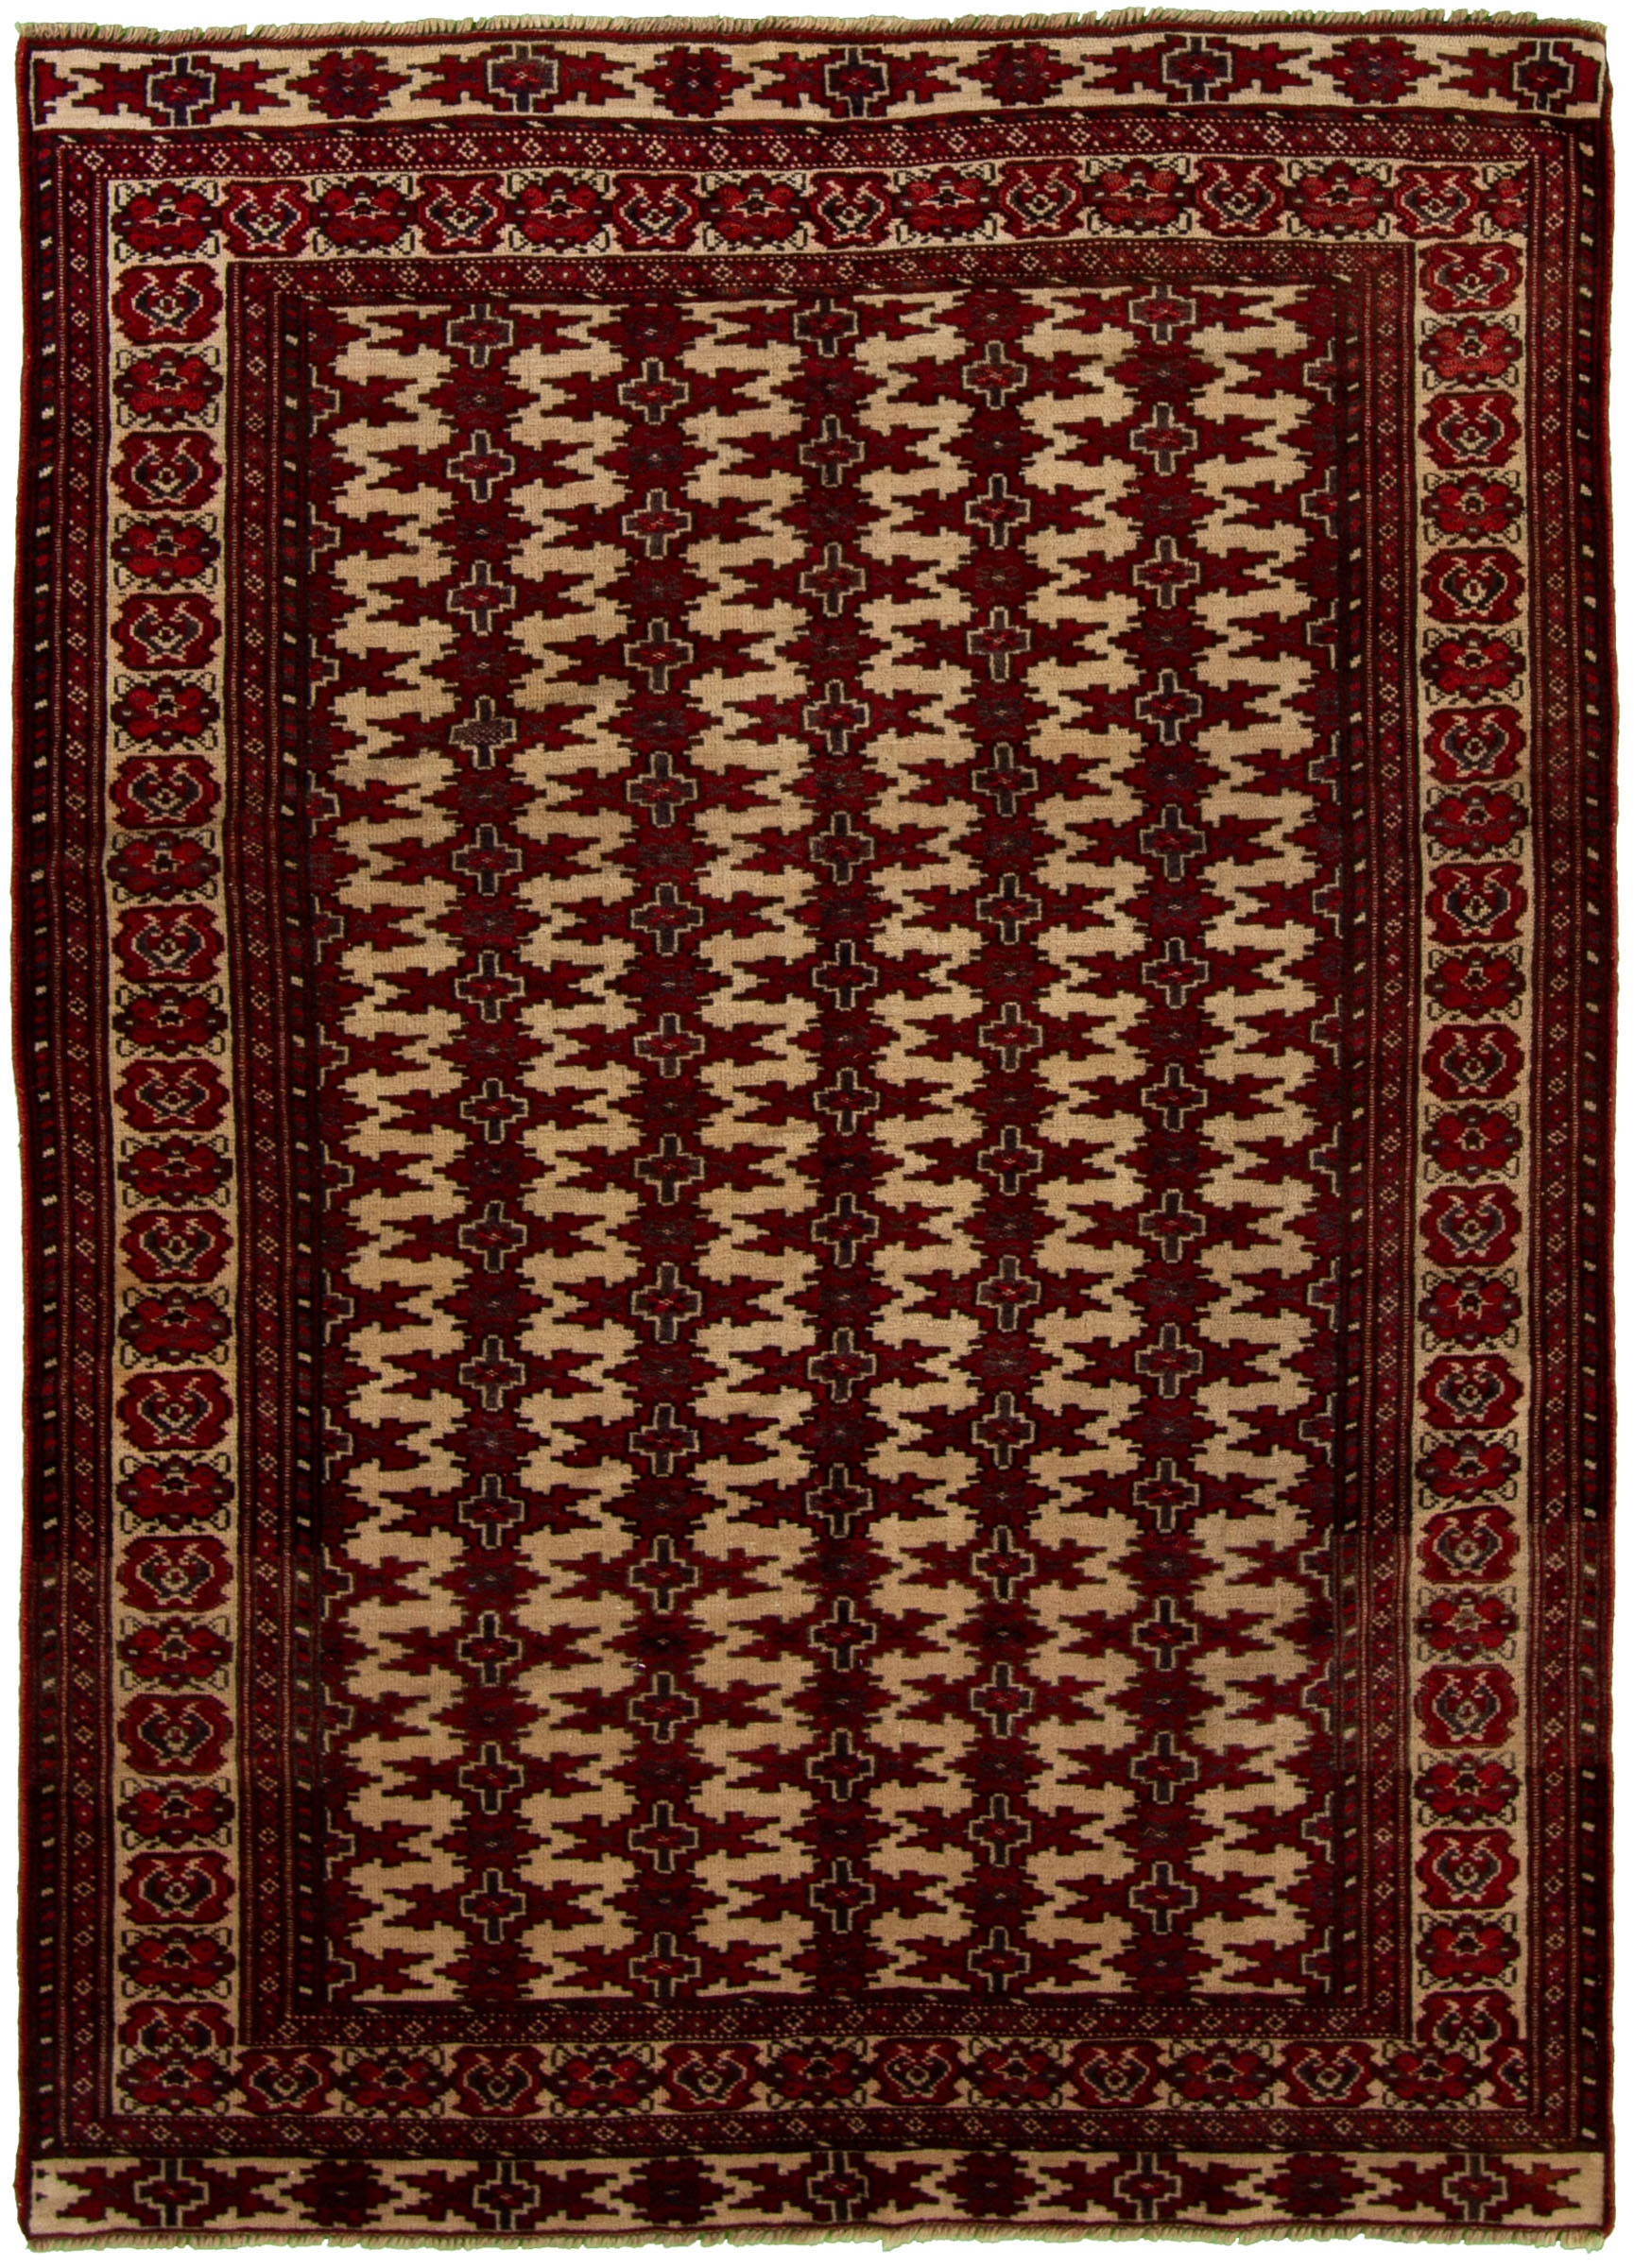 Hand-knotted Turkoman Red Wool Rug 4'5" x 6'2" Size: 4'5" x 6'2"  